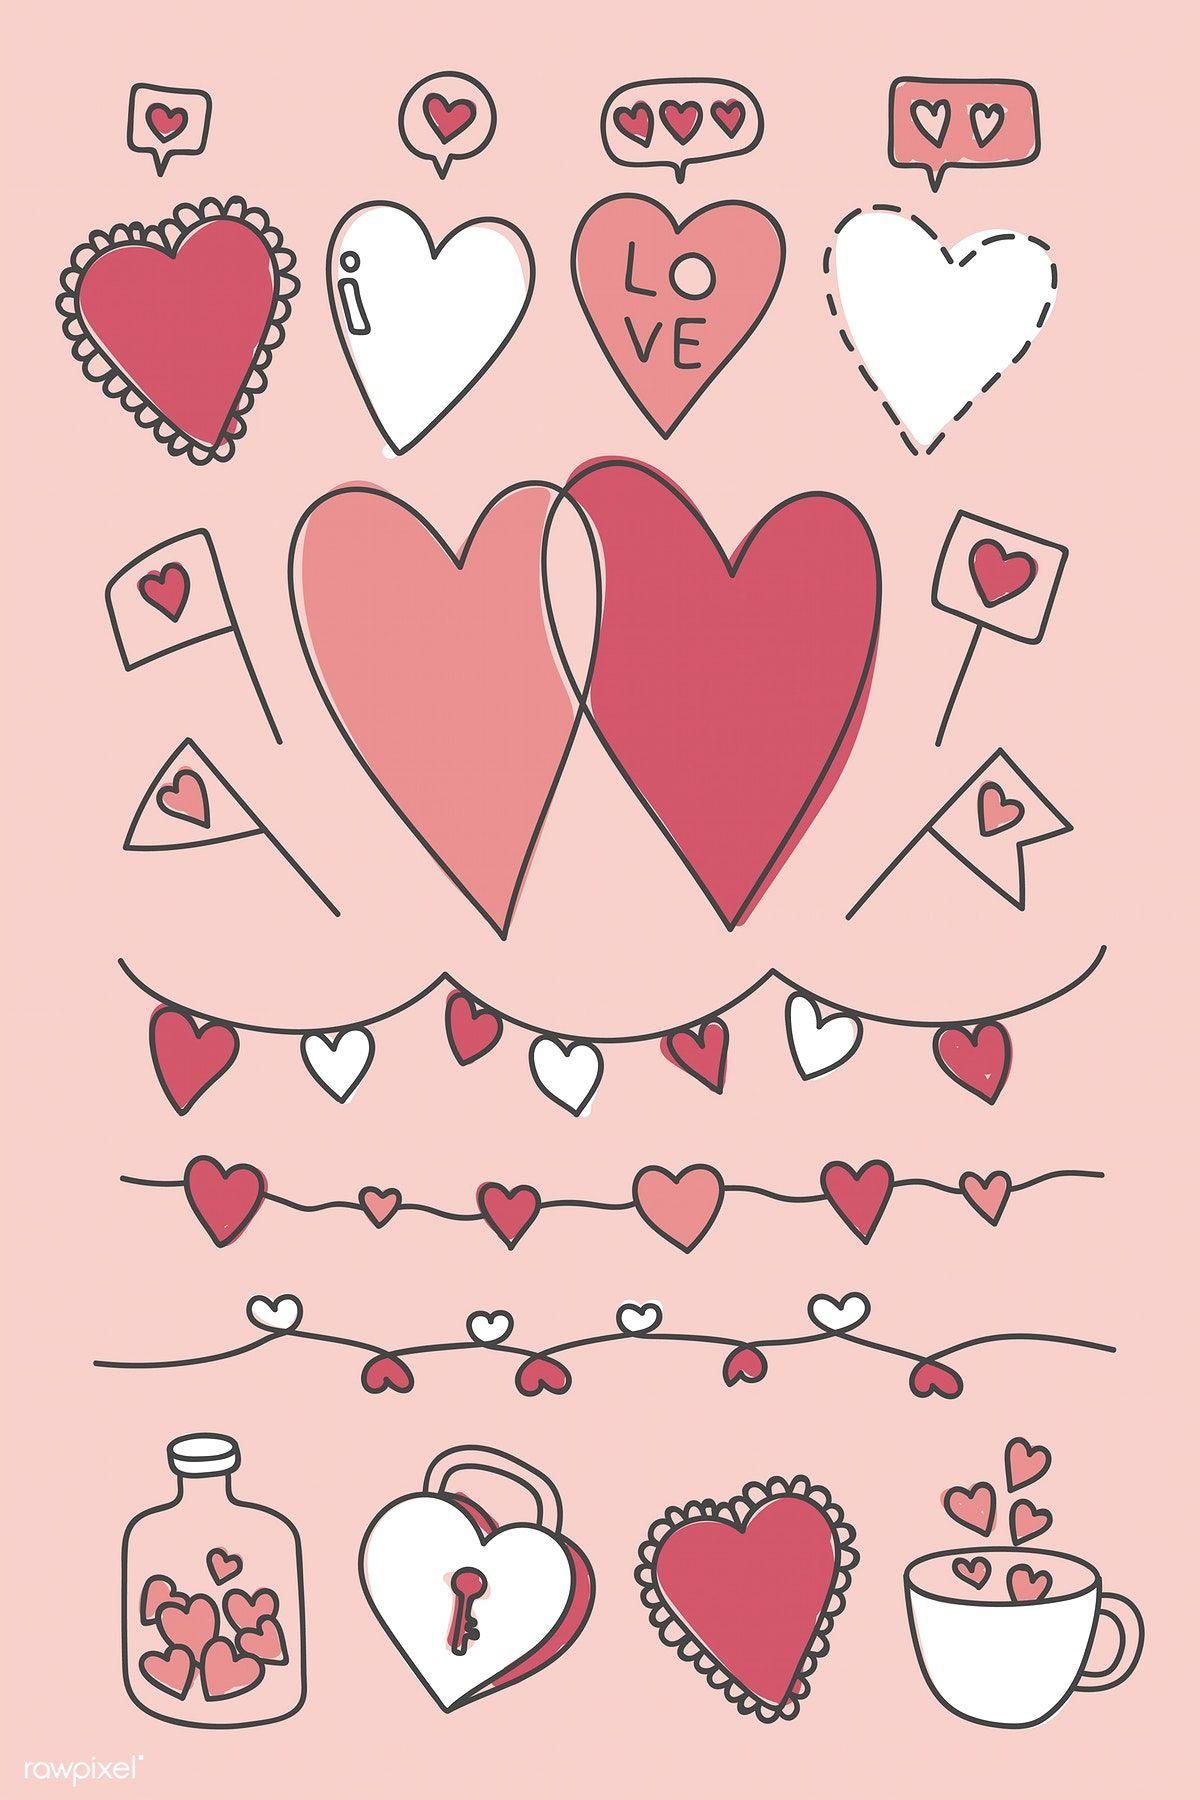 Download premium vector of Hand drawn love and valentine's day